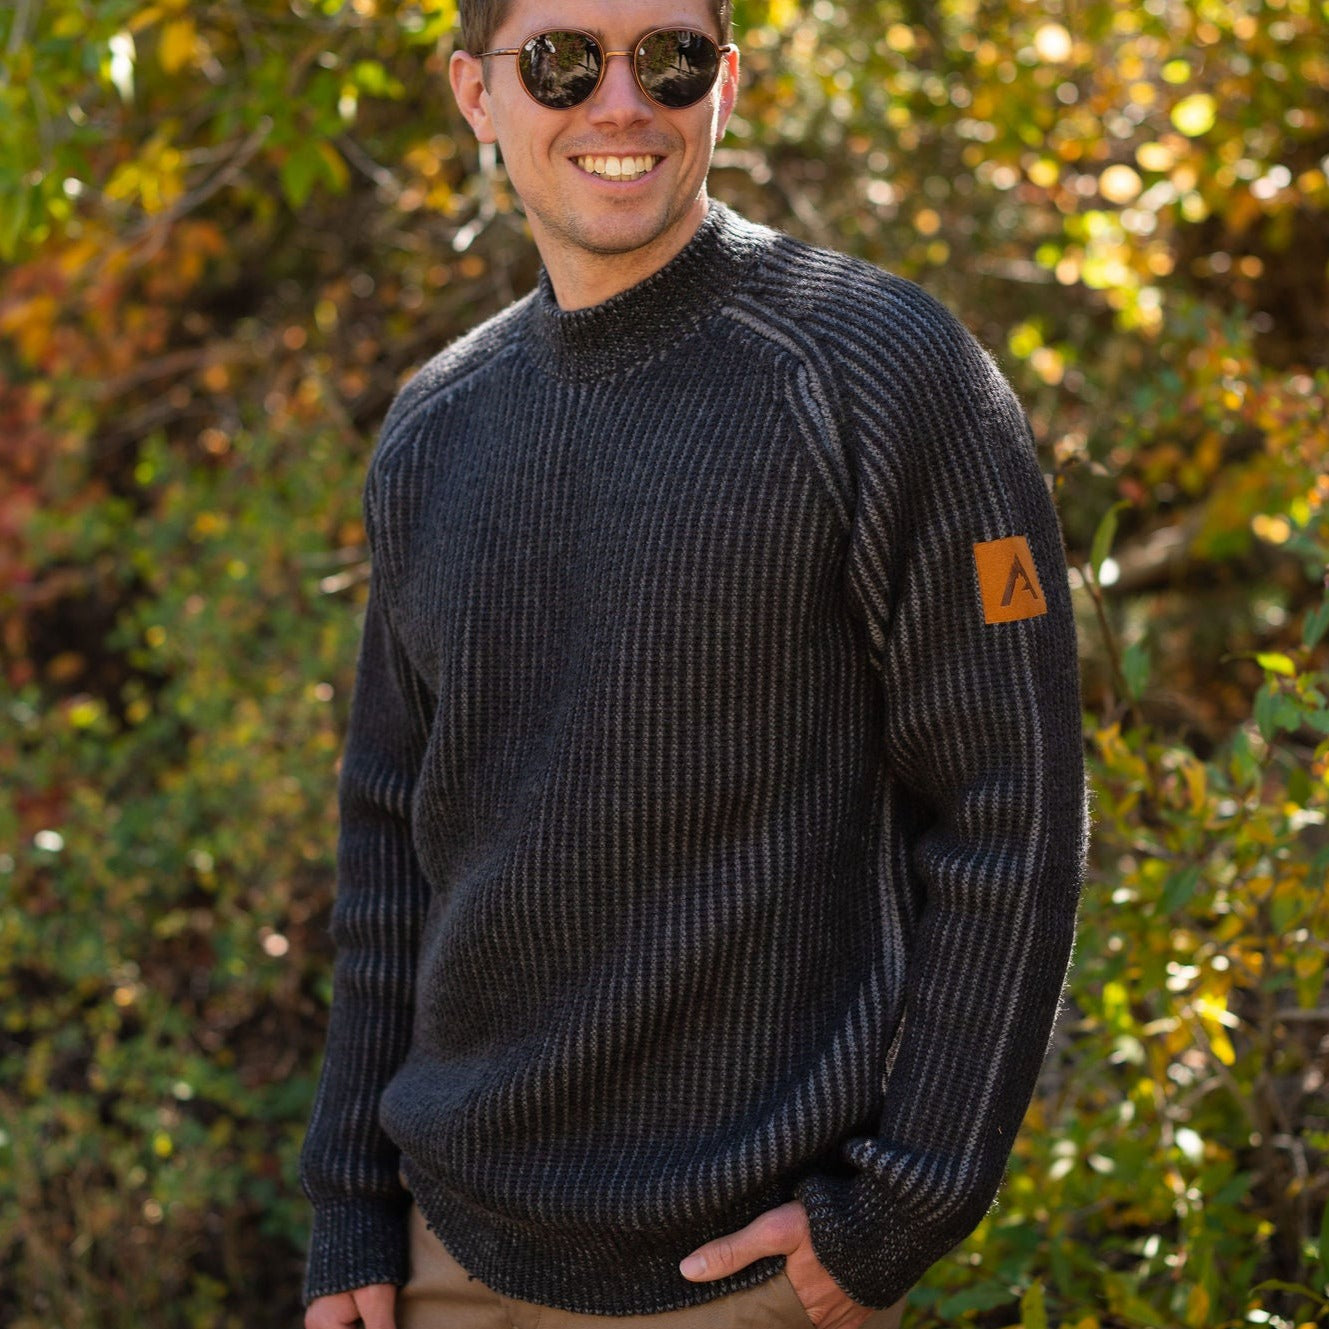 The Vista Merino Wool Sweater is crafted to a relaxed silhouette with a two-tone fisherman's ribbed-knit construction.  We love its high crew neck and soft chunky texture.  It is a timeless classic that will be your new favorite.   Made in the USA of fine Italian yarn.